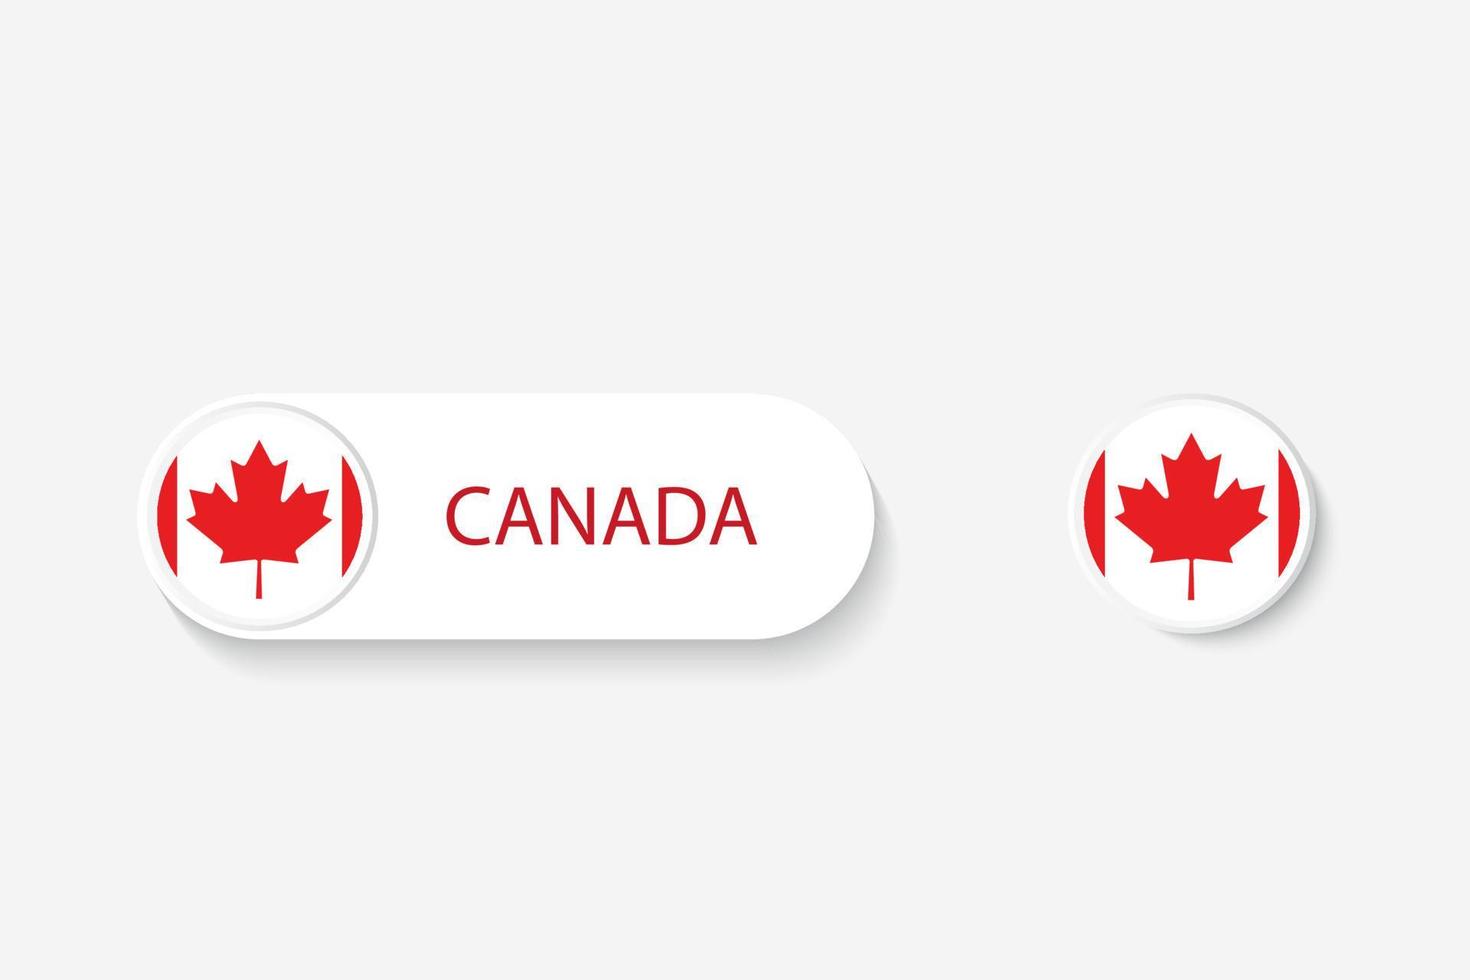 Canada button flag in illustration of oval shaped with word of Canada. And button flag Canada. vector